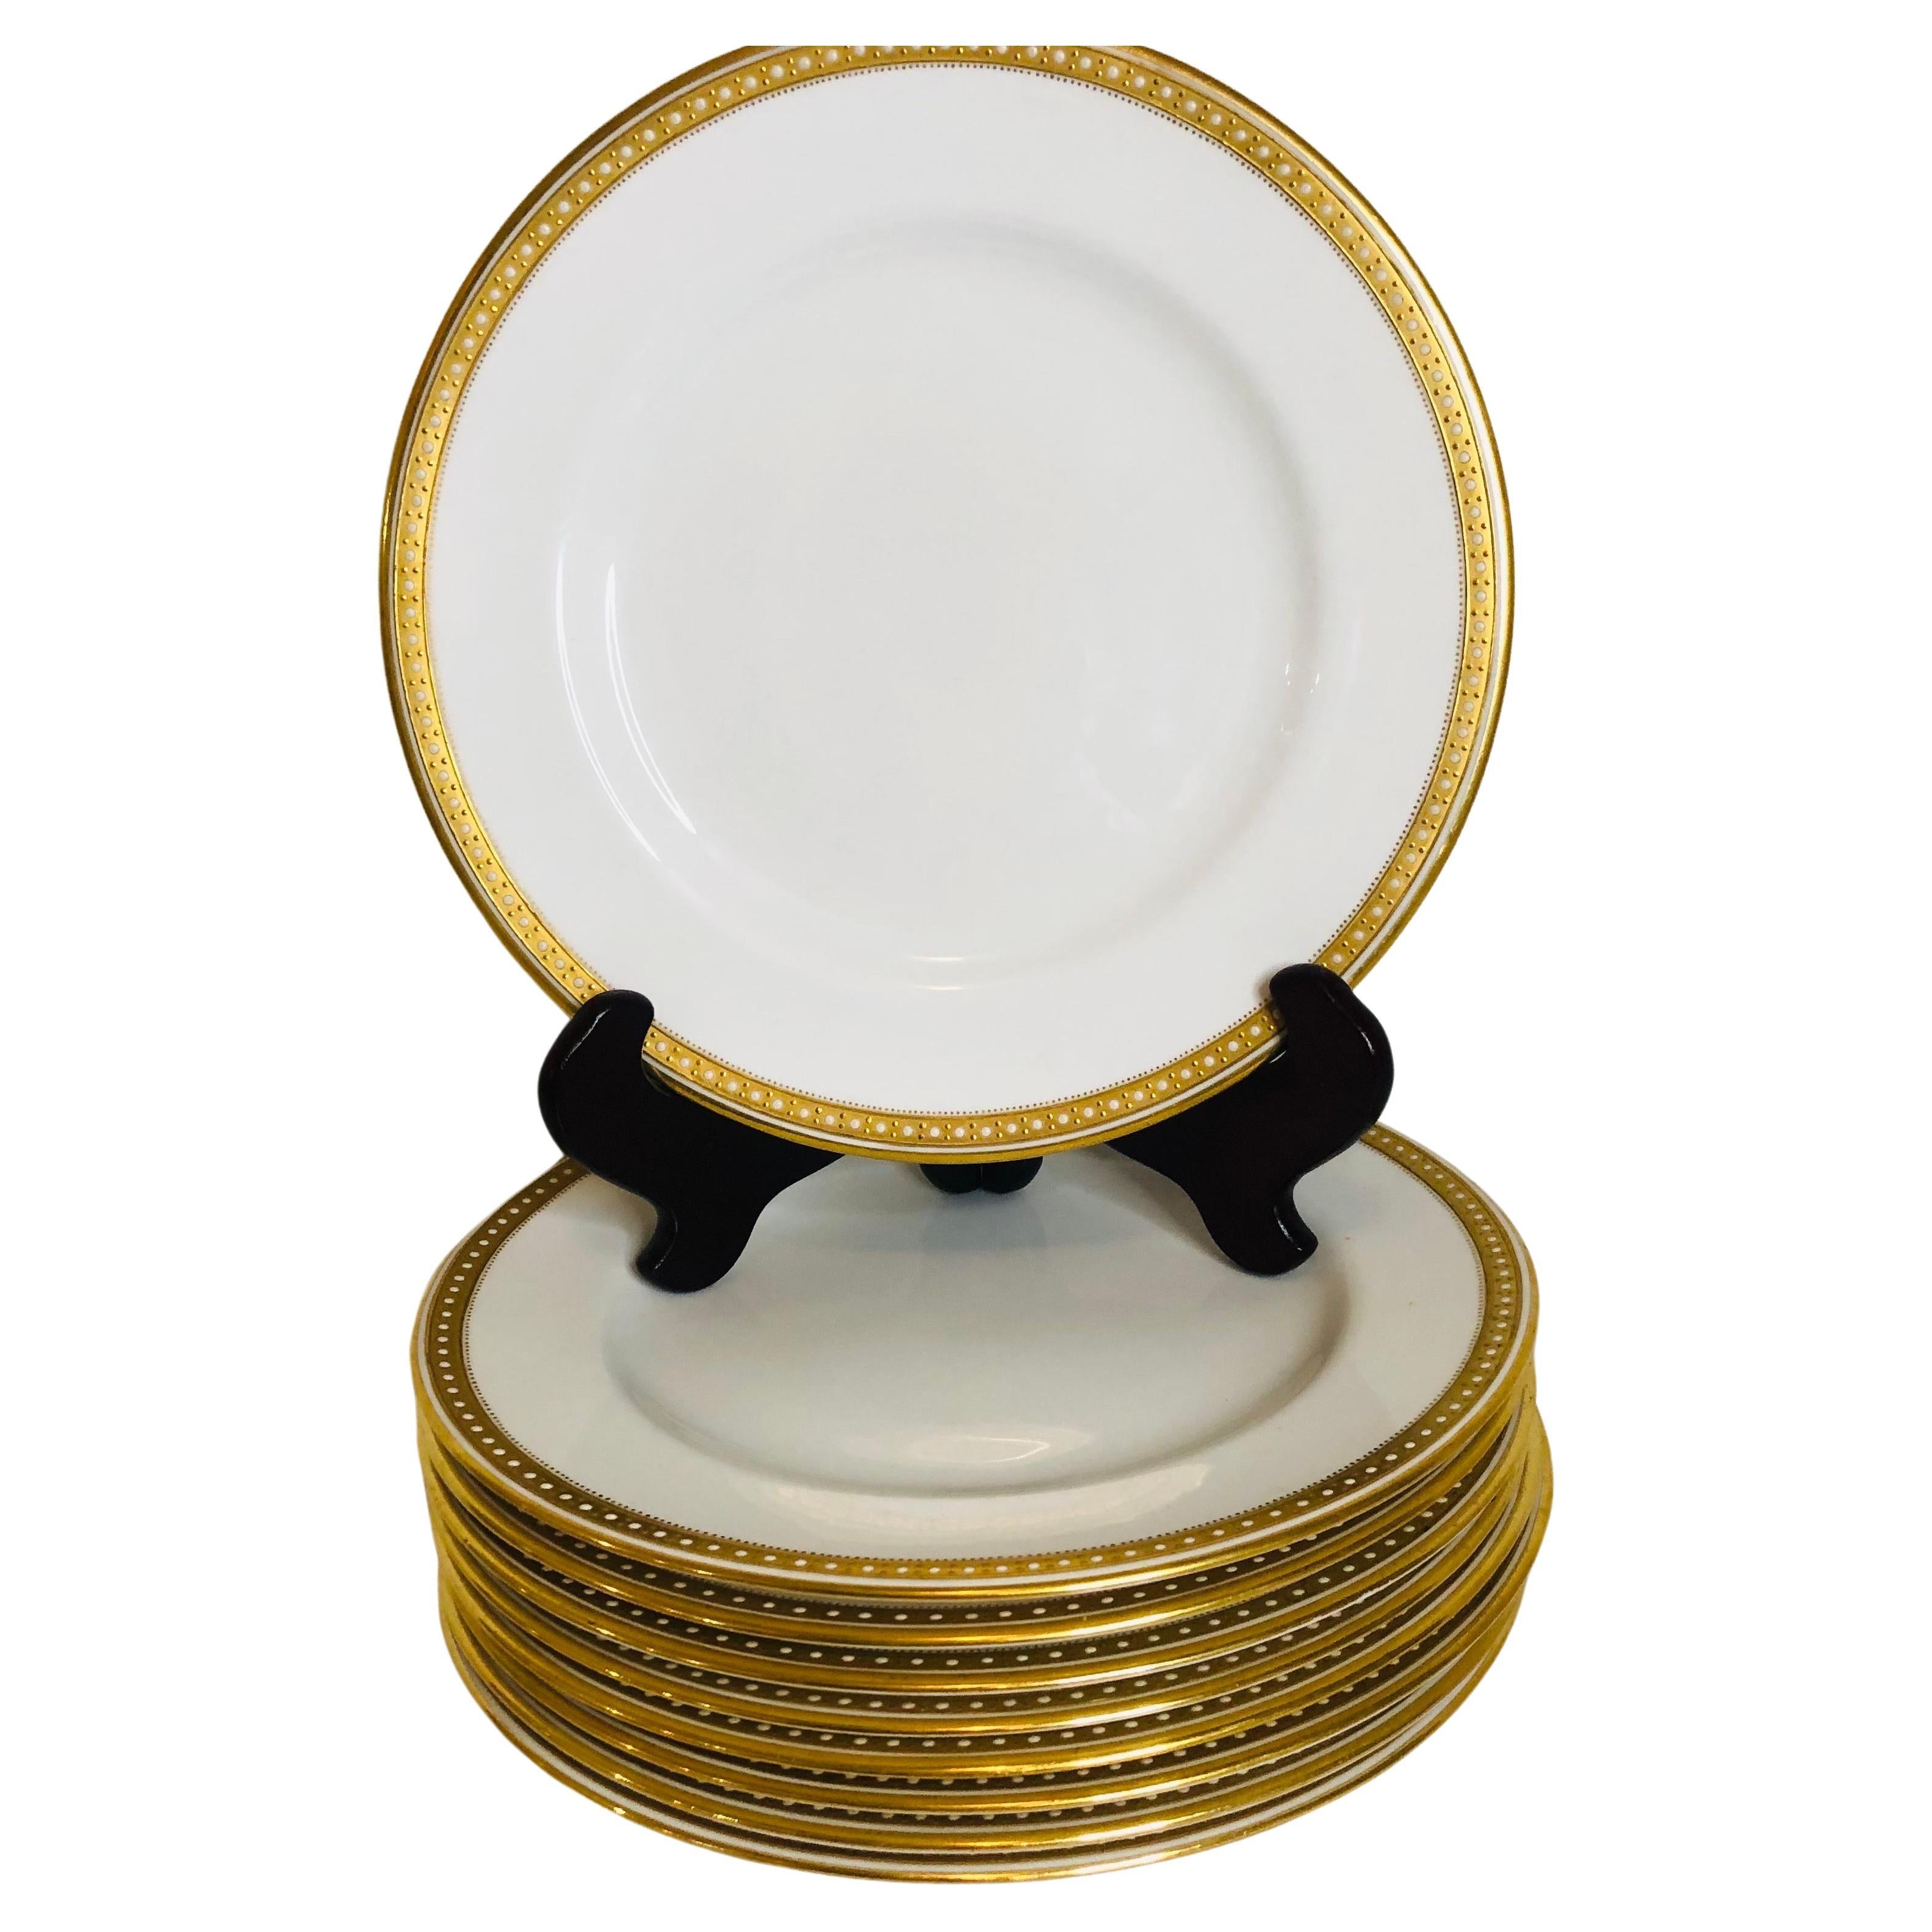 I am offering you this exquisite set of sixteen Copeland Spode dinner plates which have a gold border and white enamel jeweling on a white porcelain body. They definitely look like simple elegance, and they would look beautiful with any dinnerware